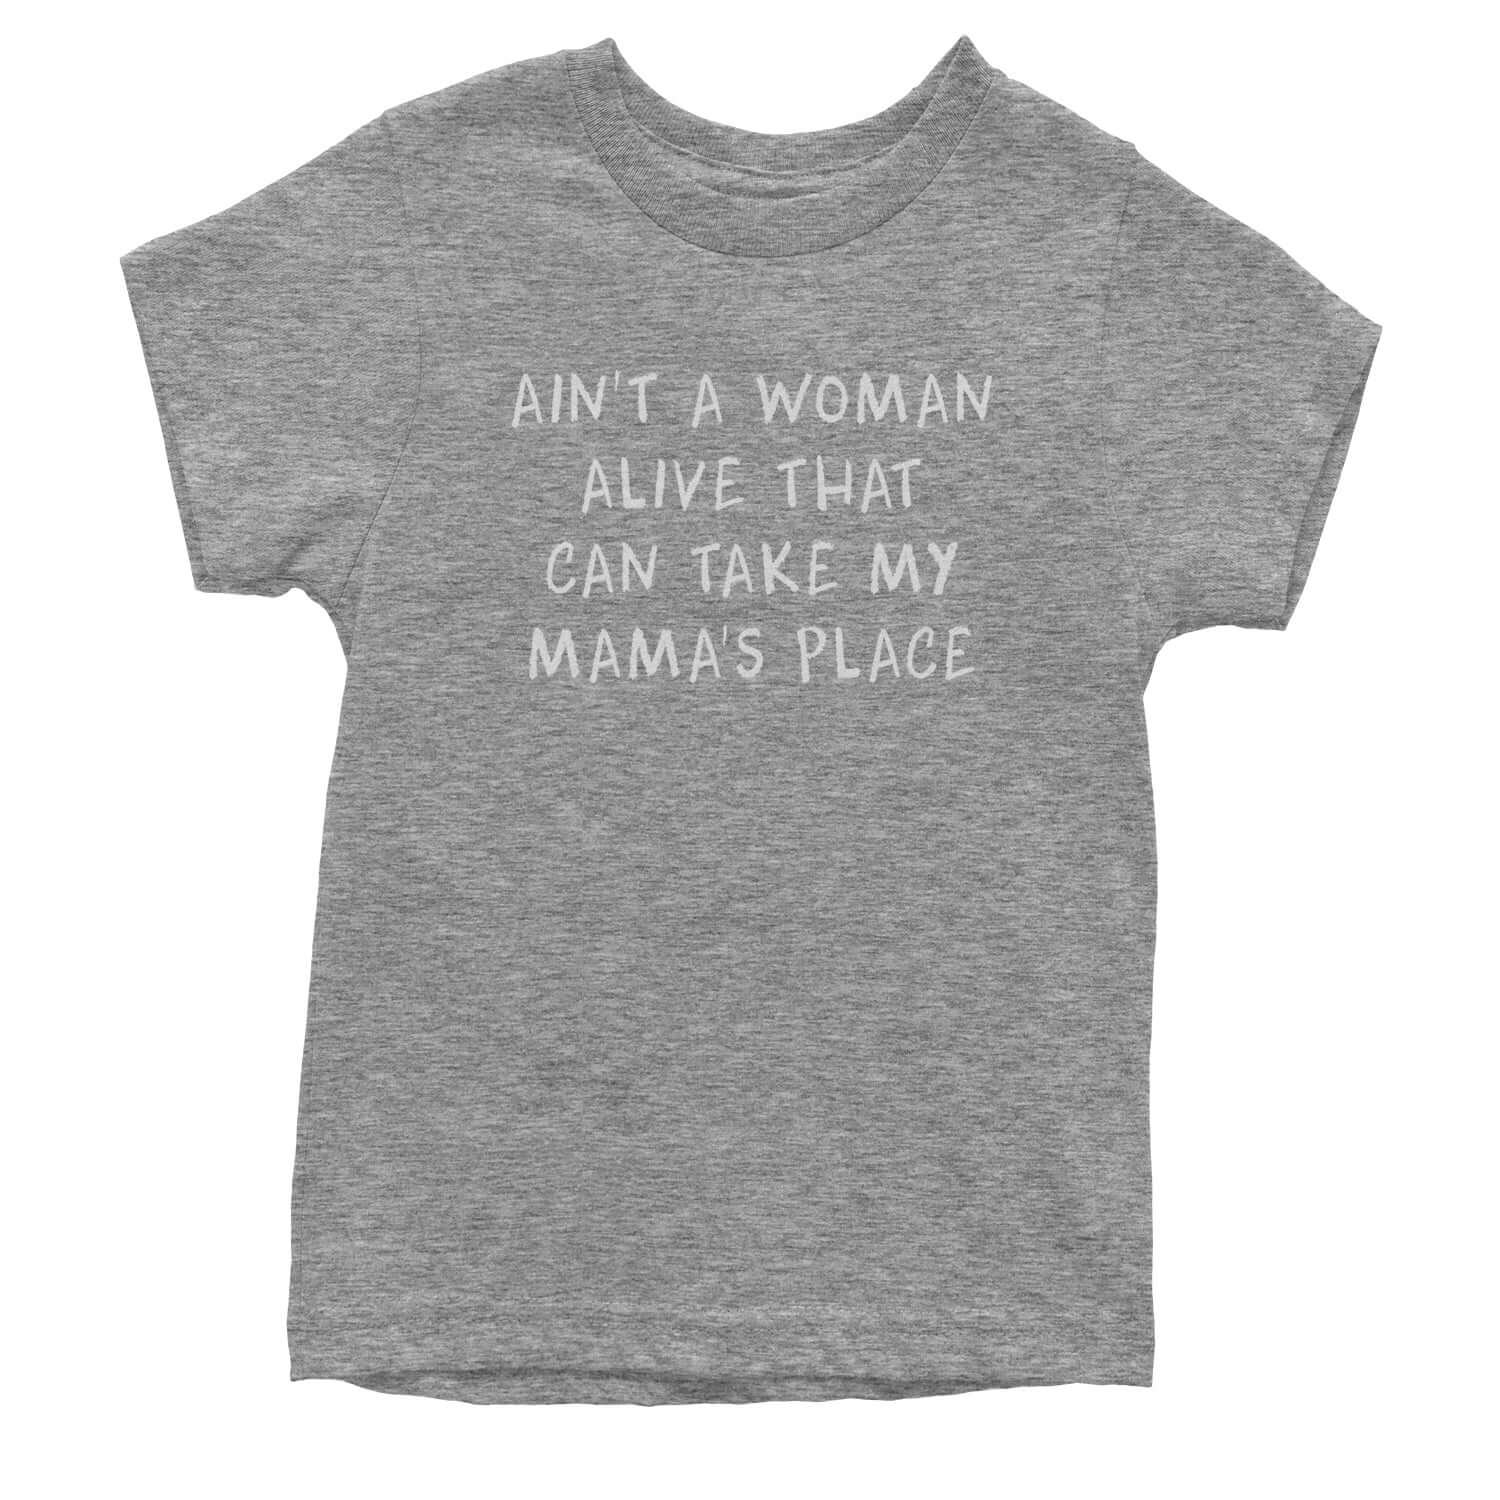 Ain't A Woman Alive That Can Take My Mama's Place Youth T-shirt